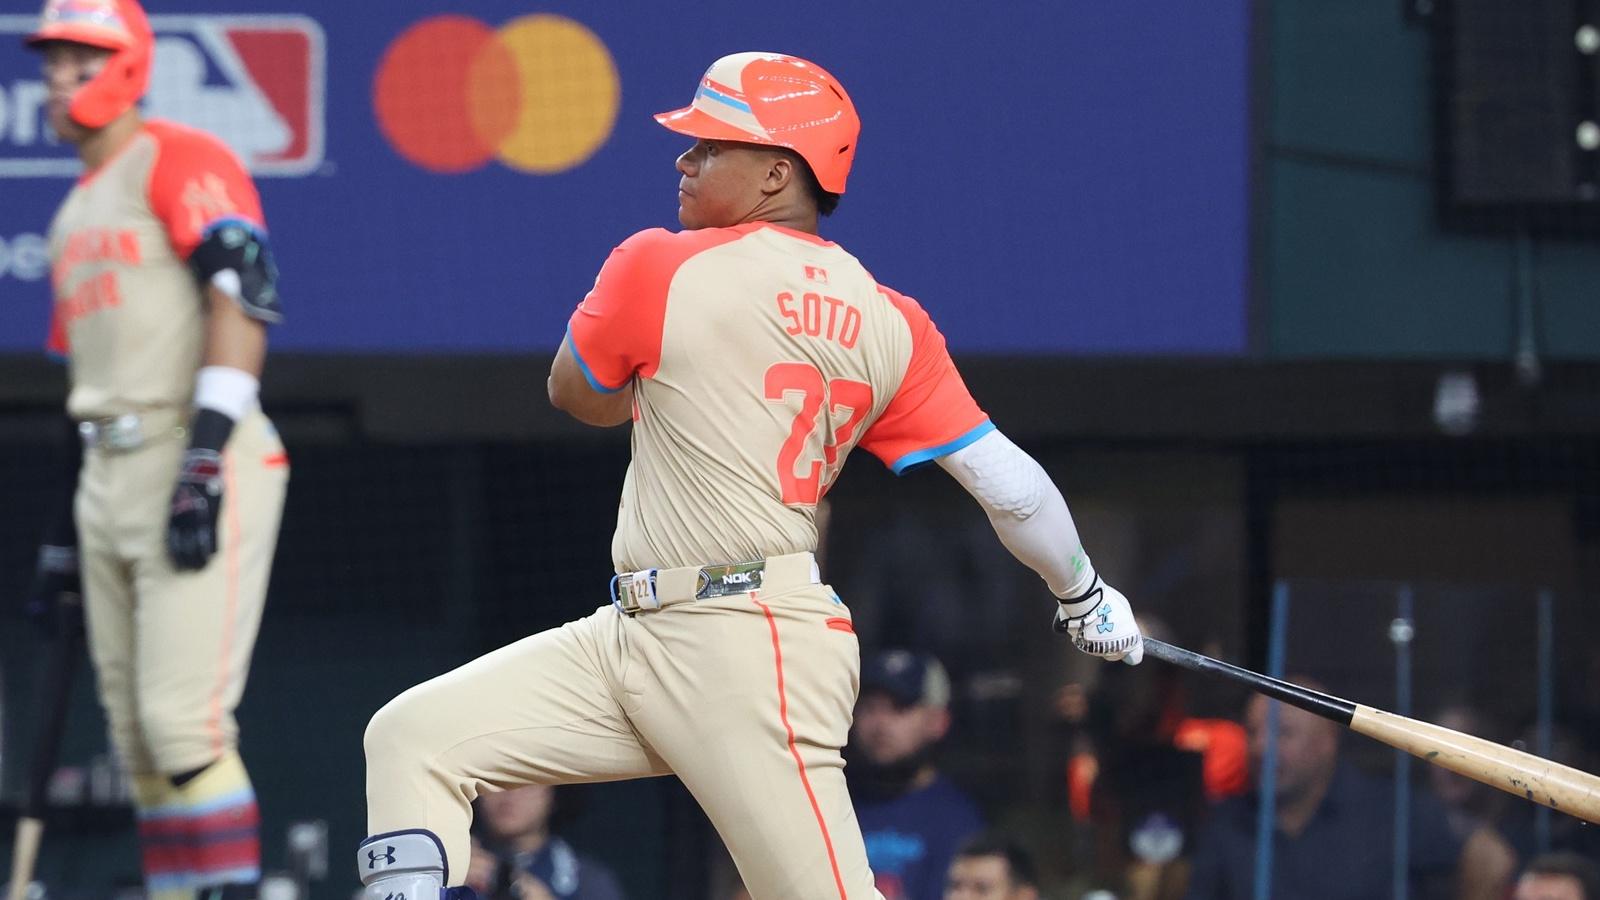 American League right fielder Juan Soto of the New York Yankees (22) hits a two RBI double in the third inning against the National League during the 2024 MLB All-Star game at Globe Life Field.